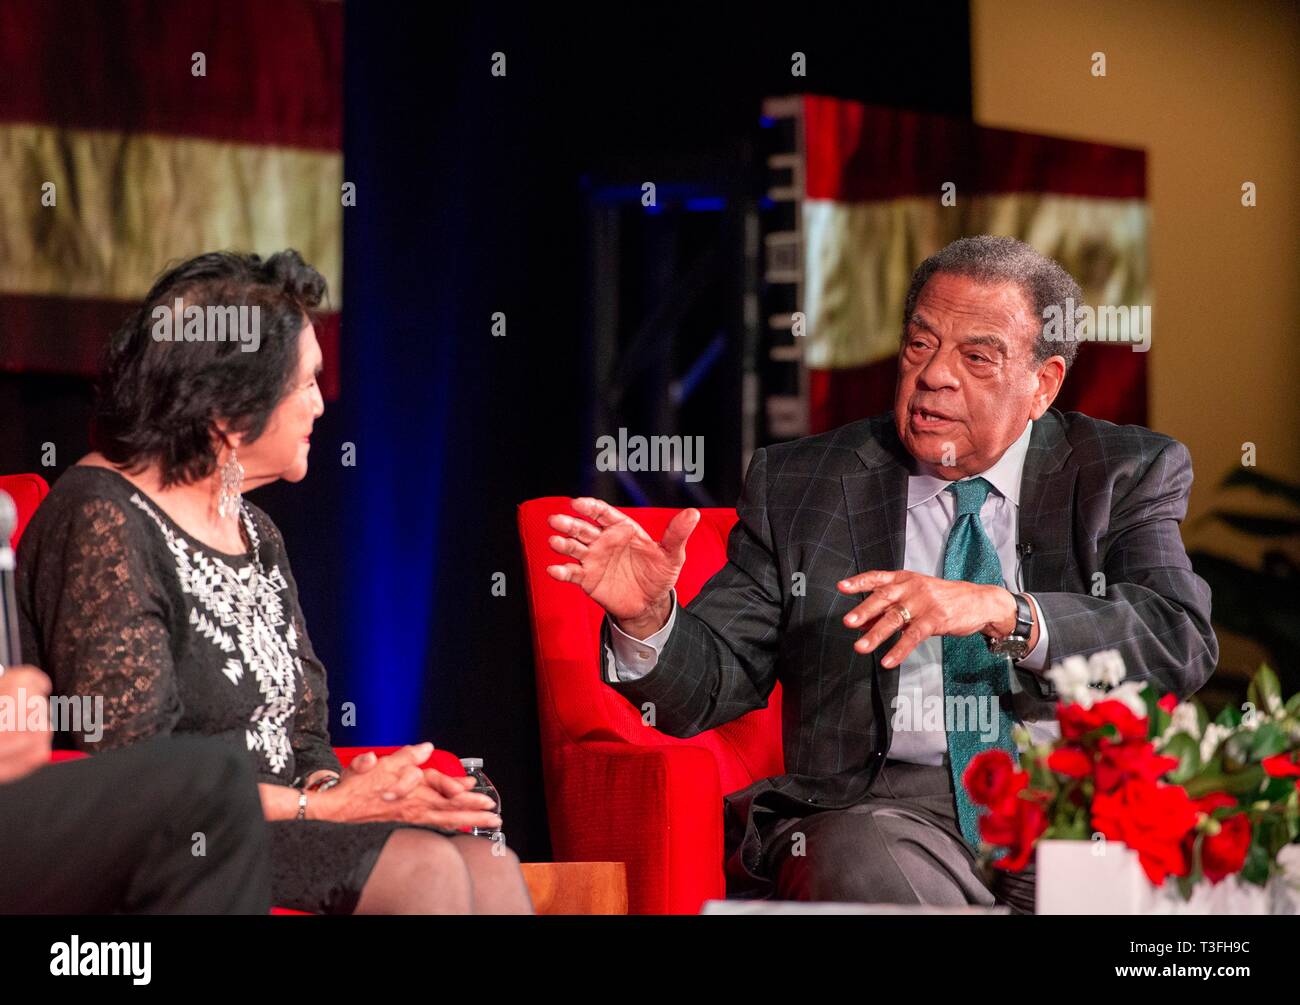 Texas, USA. 08th Apr, 2019. Longtime civil rights leaders Dolores Huerta, left, and Andrew Young, right, discuss social justice efforts during the Summit on Race in America at the LBJ Presidential Library April 8, 2019 in Austin, Texas. Huerta, a Presidential Medal of Freedom recipient, co-founded the United Farm Workers of America with Cesar Chavez in the 1960s and has spent decades advocating for laborers, women, and children. Young, a key lieutenant to Martin Luther King, Jr. in the civil rights movement of the 1960s, has served as mayor of Atlanta, U.S. congressman from Georgia, and U.S. A Stock Photo